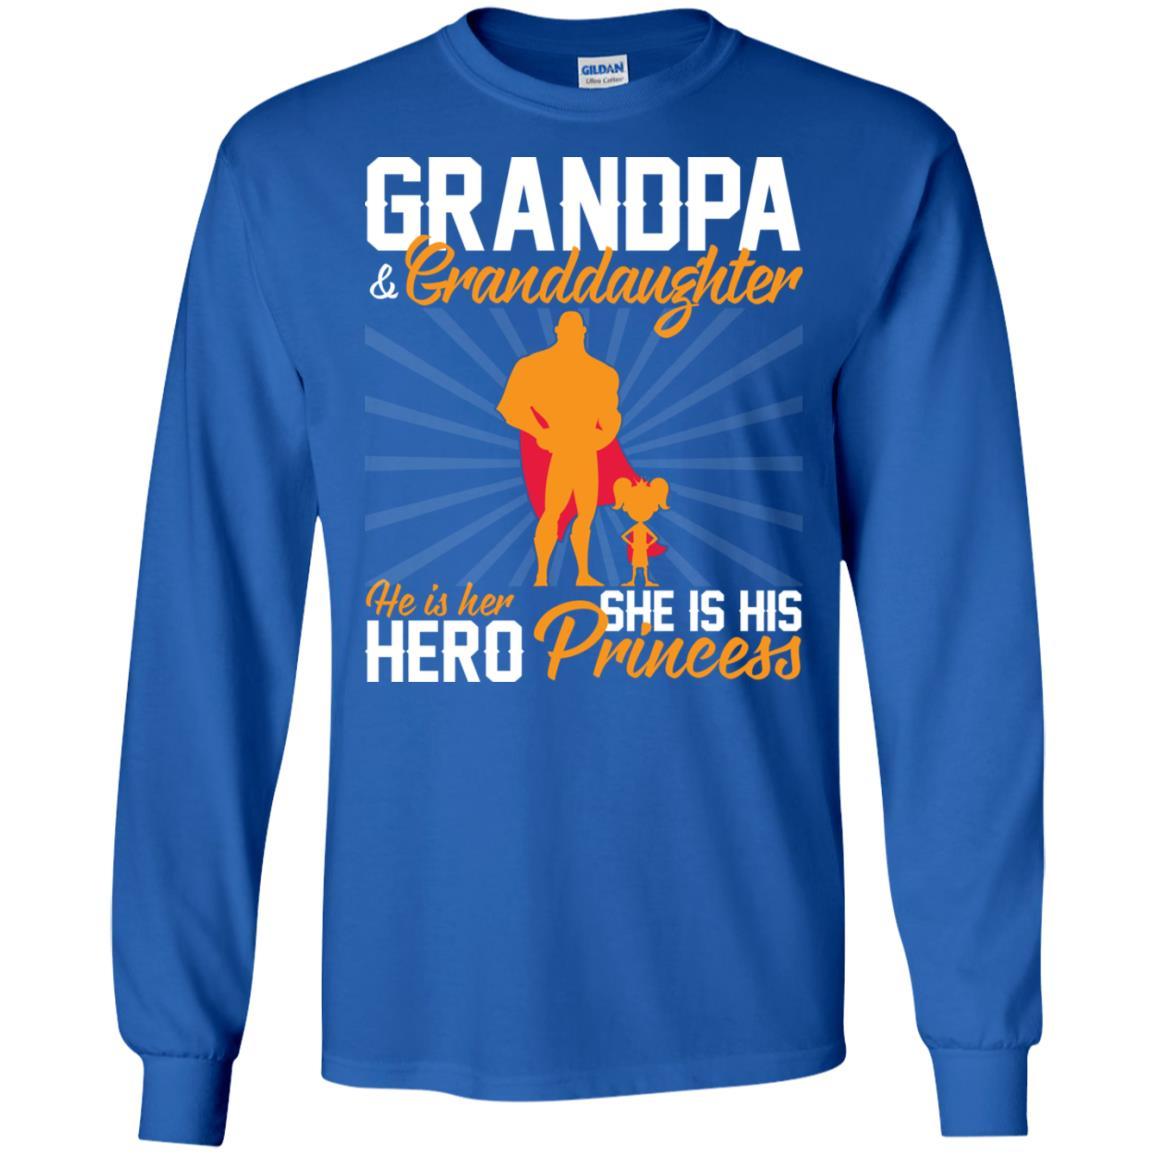 Military T-Shirt "Grandpa & granddaughter he is her hero she is his princess On" Front-TShirt-General-Veterans Nation